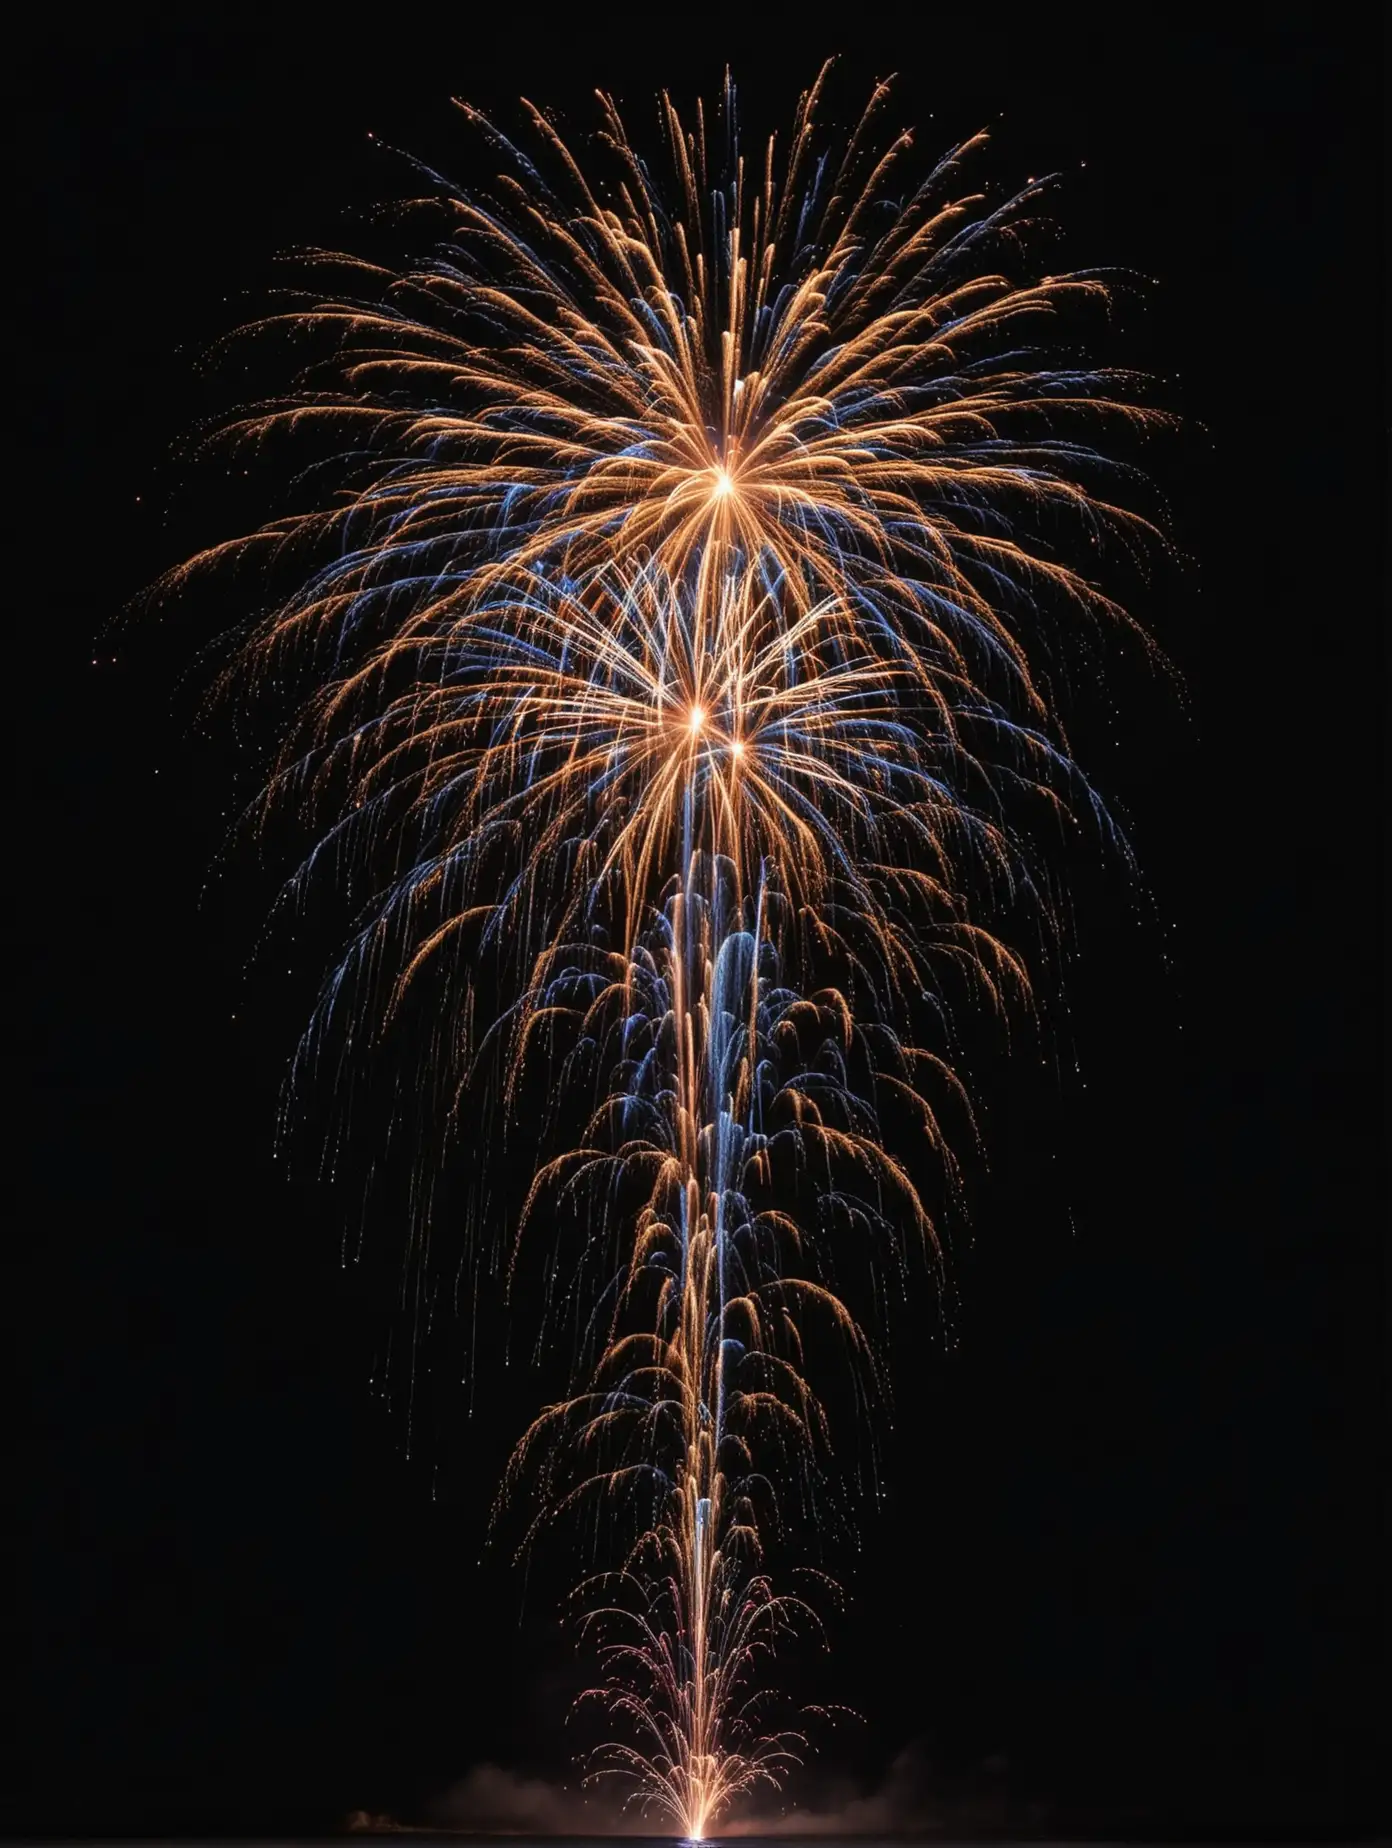  arching, falling, cascading firework falling with pure black background all within photo